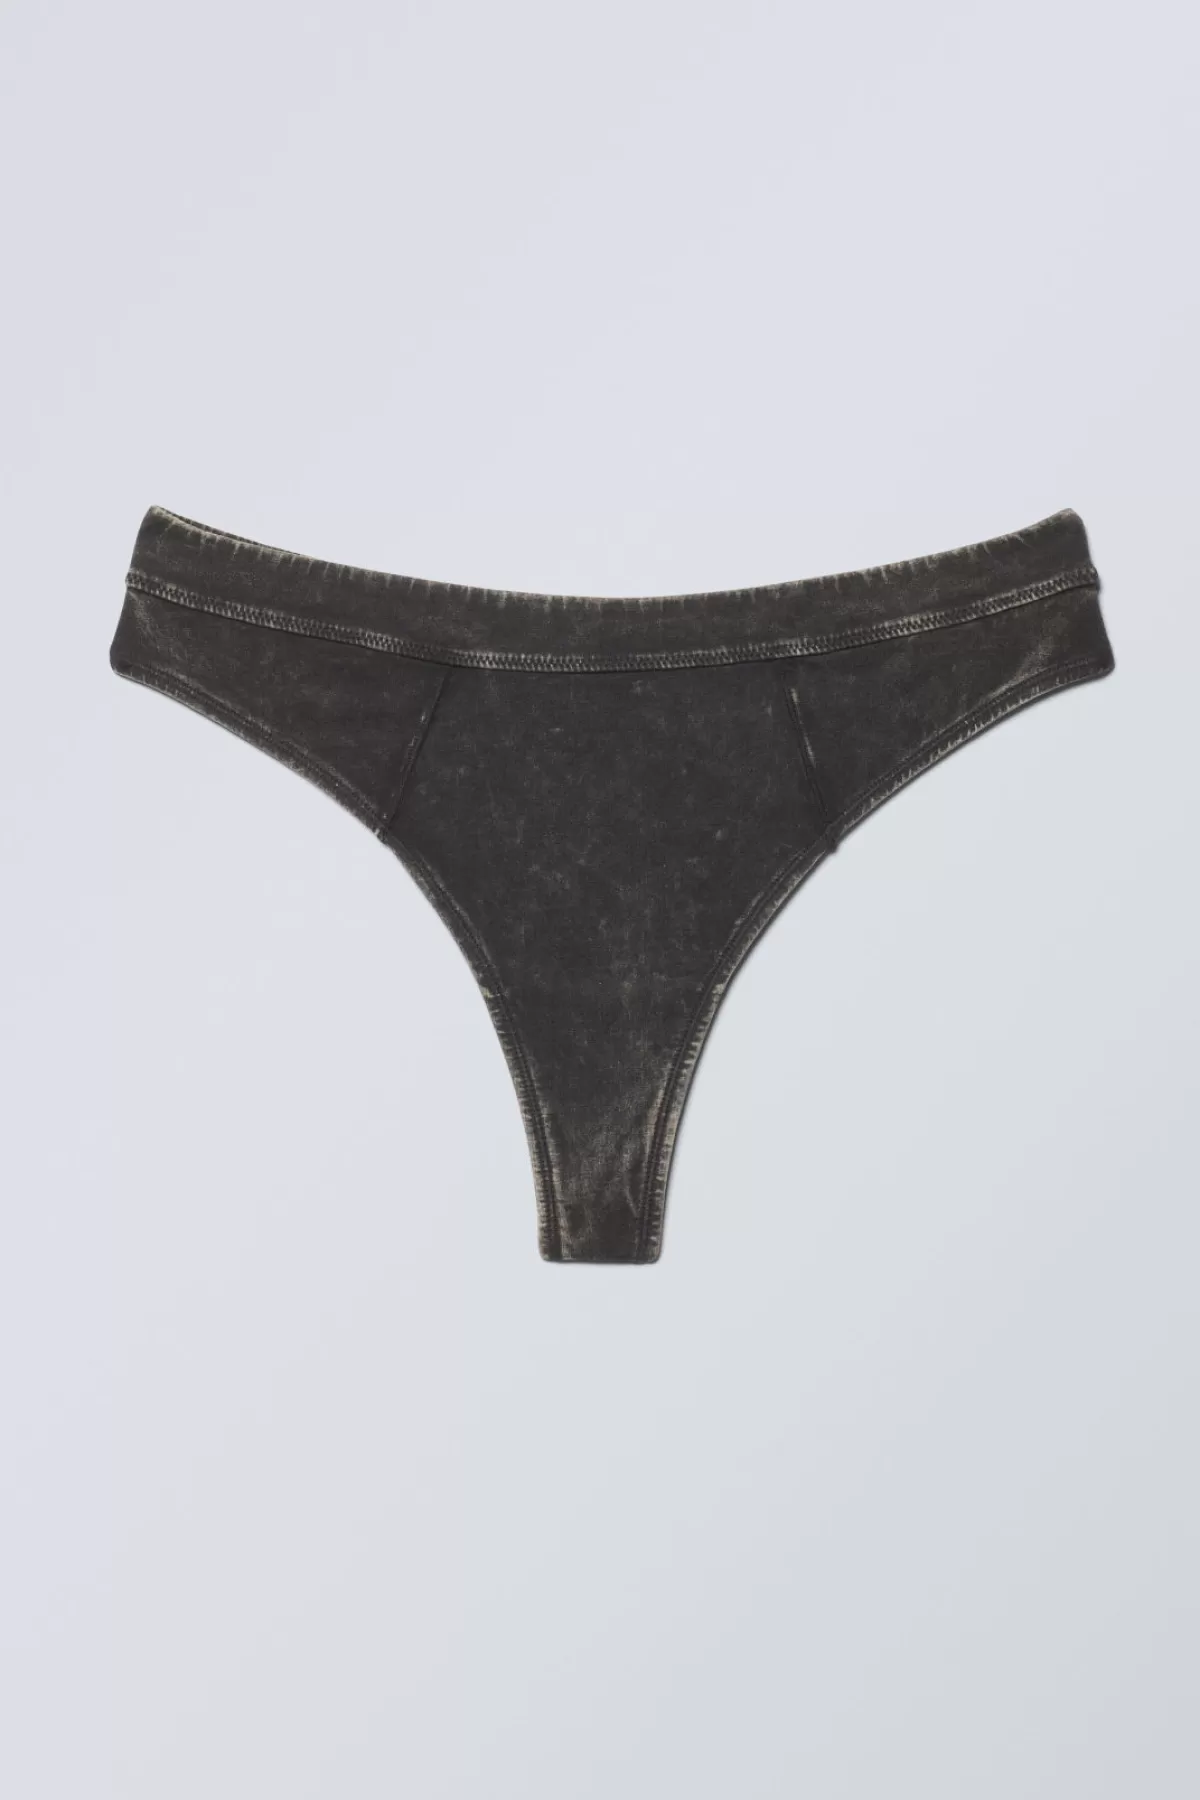 Weekday Miley Washed Cotton Thong Bleach Washed Black Best Sale